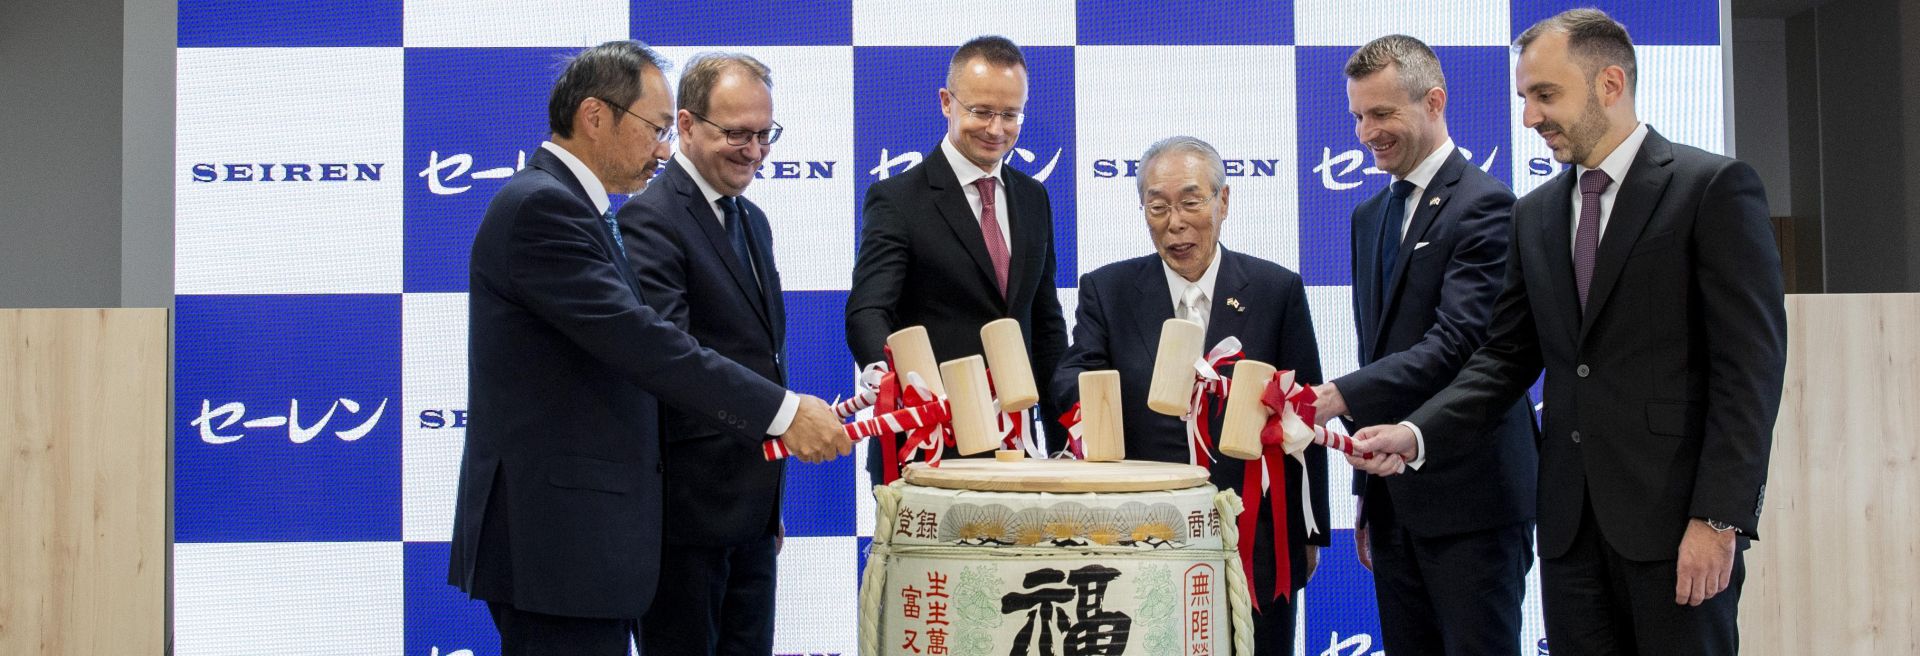 Japanese Automotive Supplier’s New Plant Paves Way To Dynamic Growth